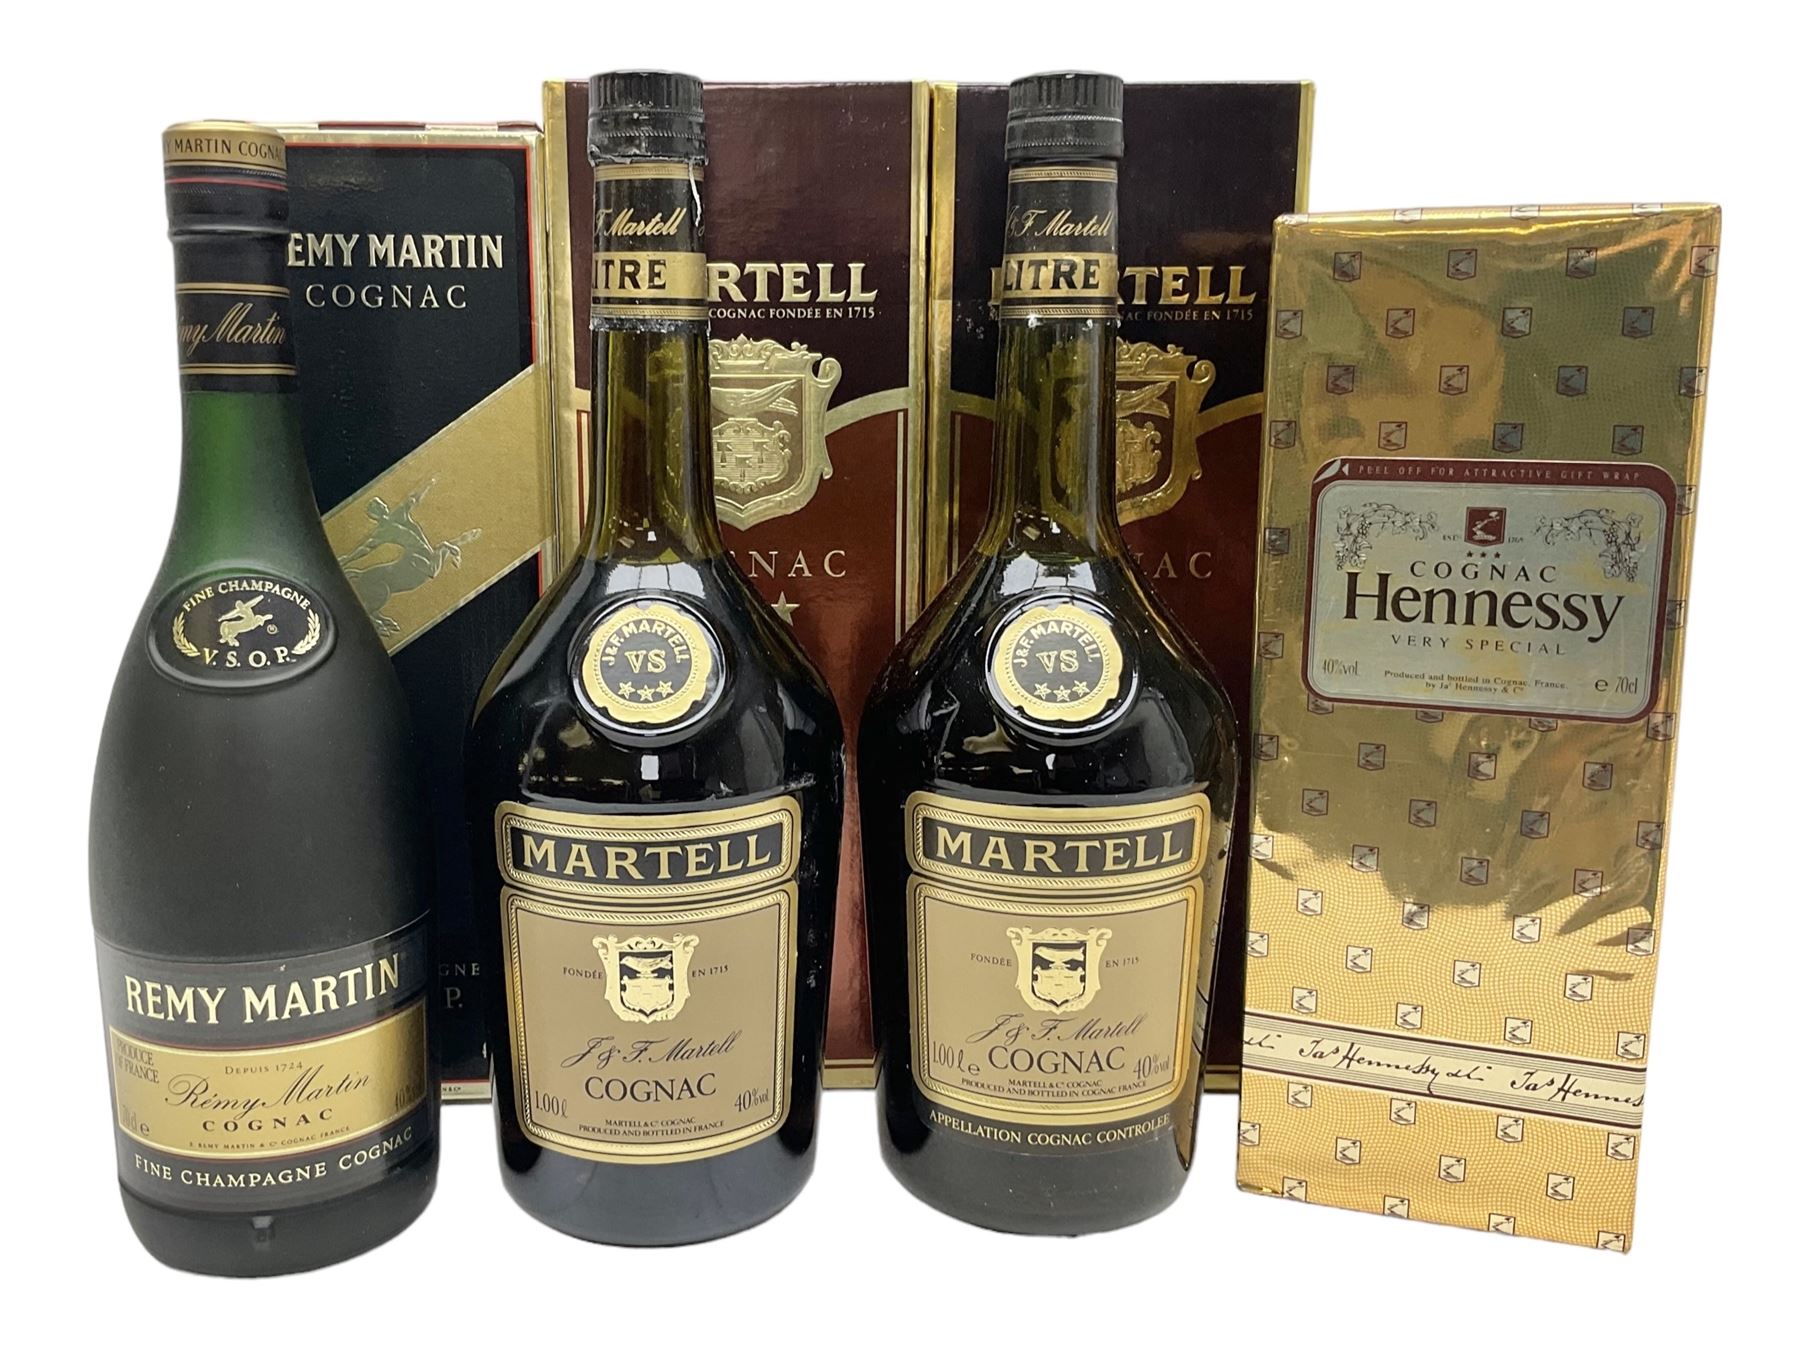 Special Hennessy Cognac, in box, 40% presentation bottle, 70cl vol, gift Very one wrap Martell